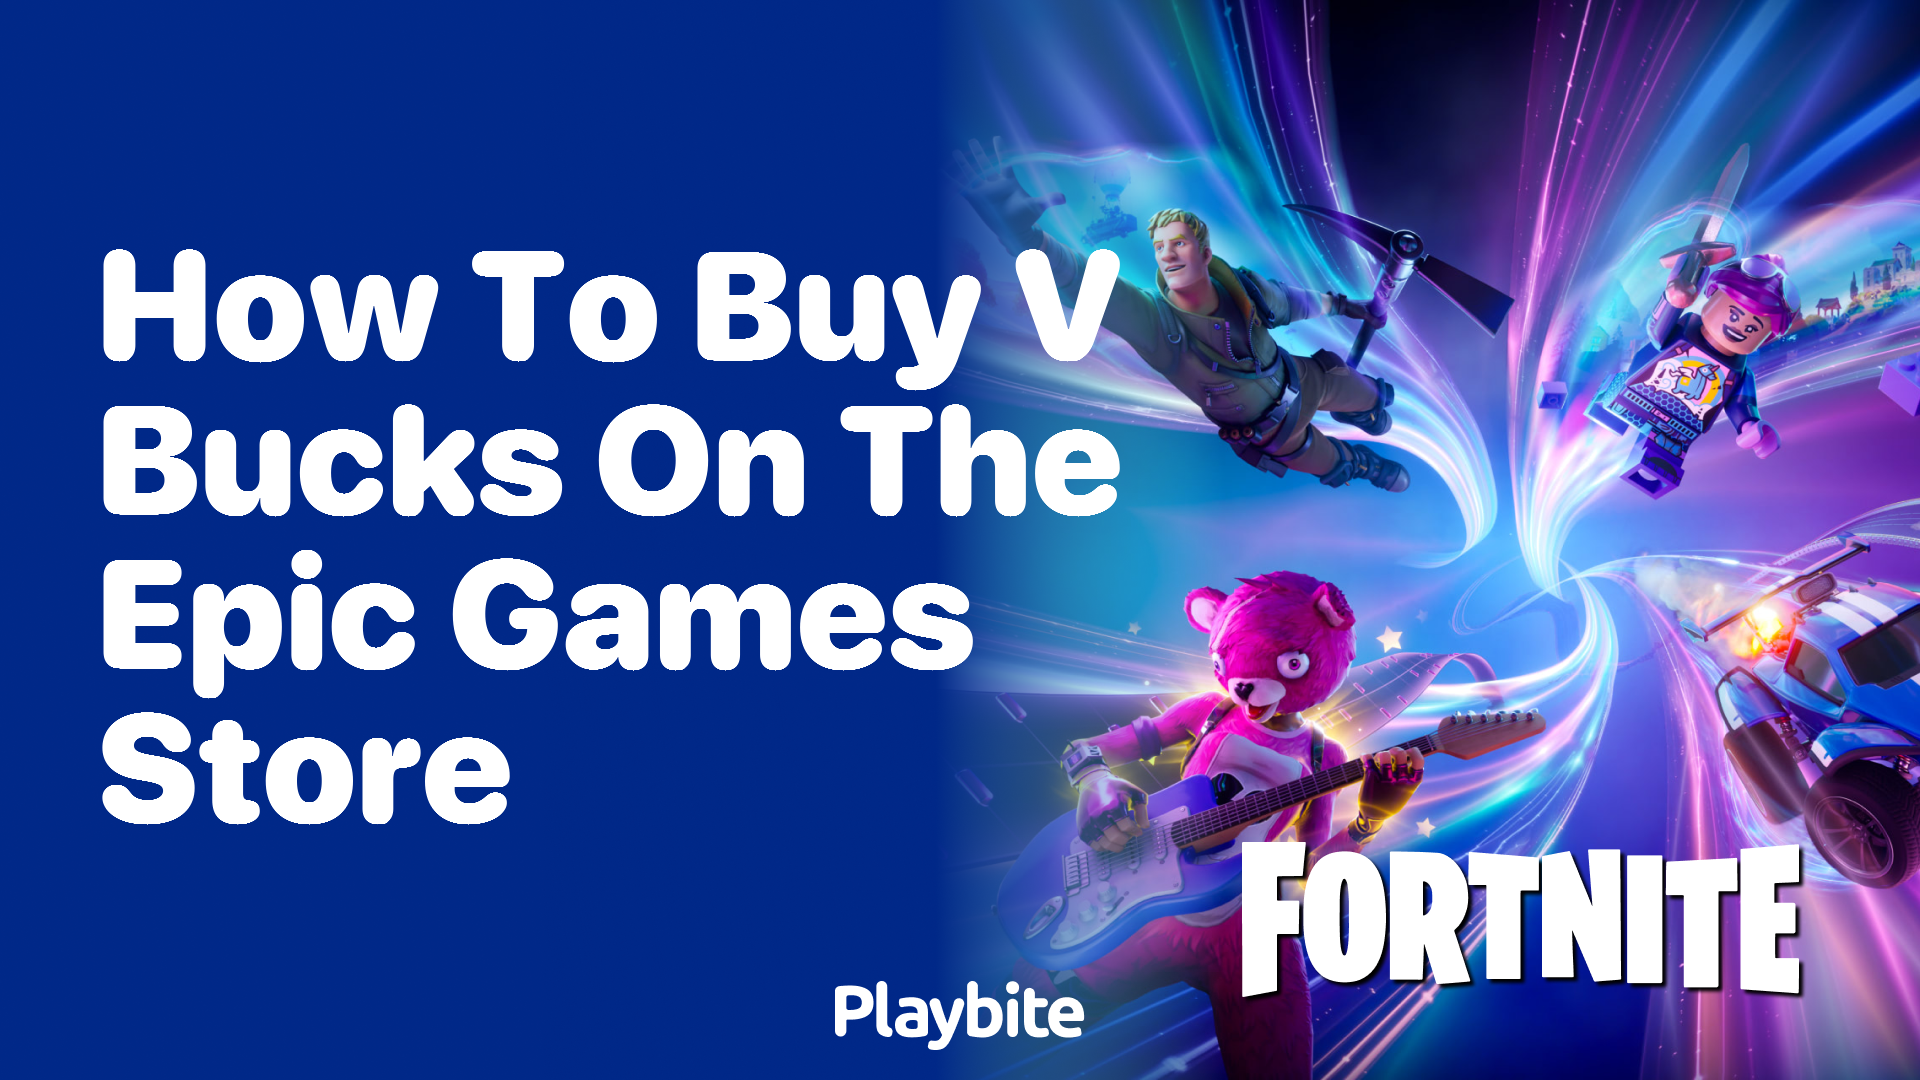 How to Buy V-Bucks on the Epic Games Store